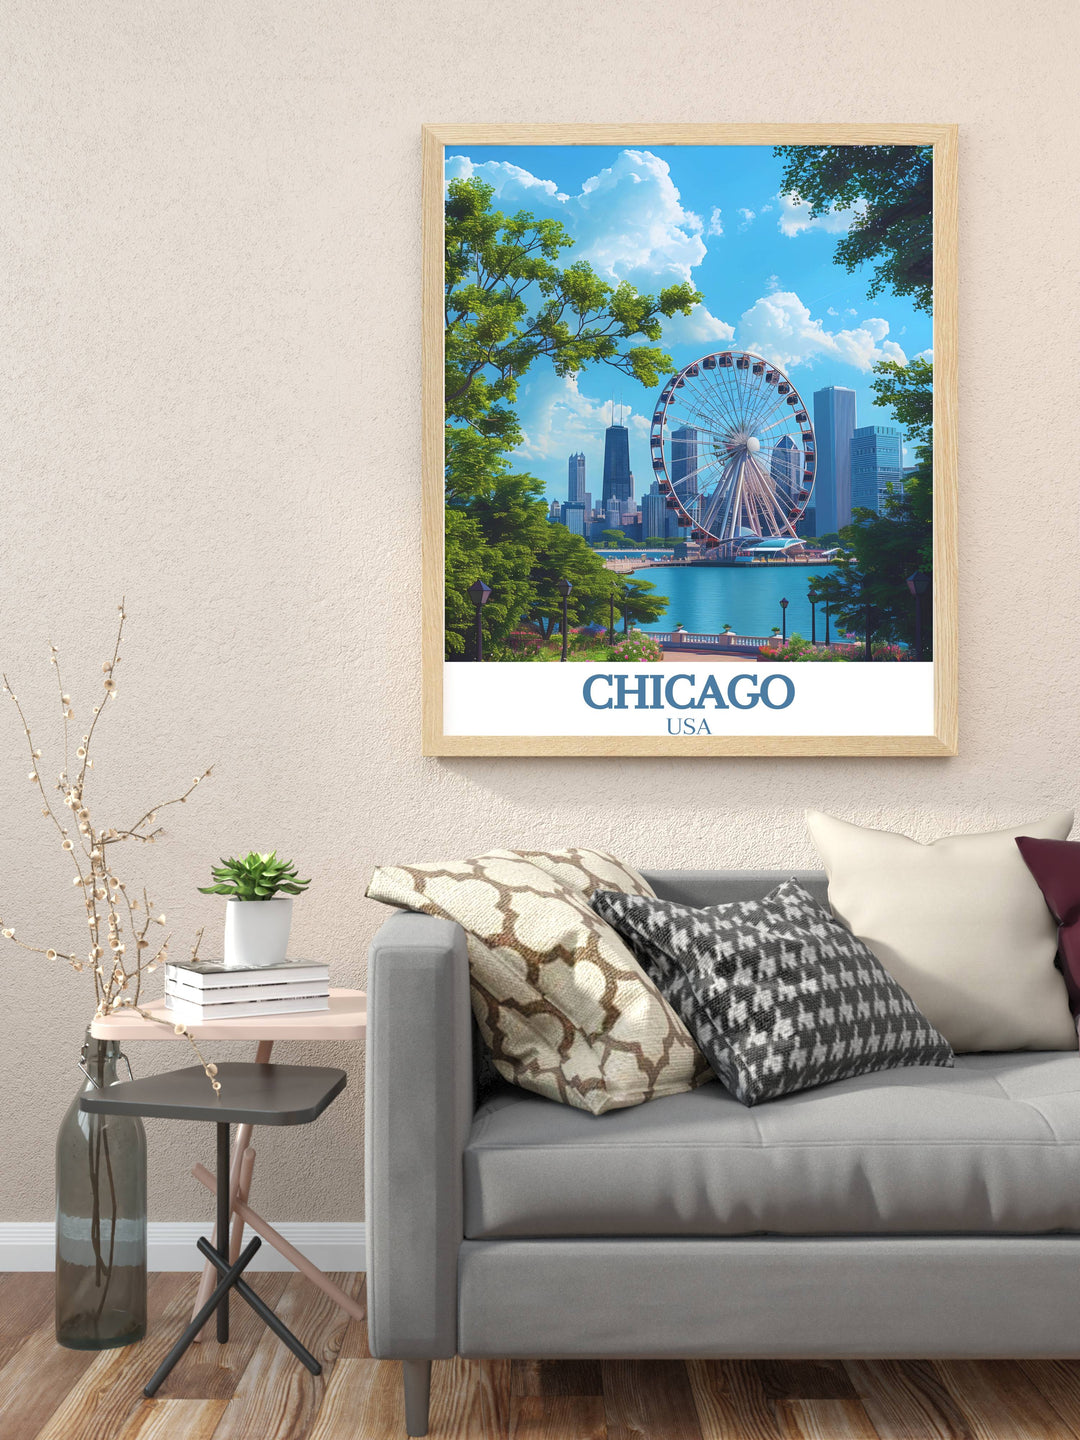 Chicago art print featuring the lively Navy Pier scene. This travel print is perfect for those who appreciate the charm of Chicagos landmarks. It is a great choice for decorating your home office or giving as a special gift to friends and family.